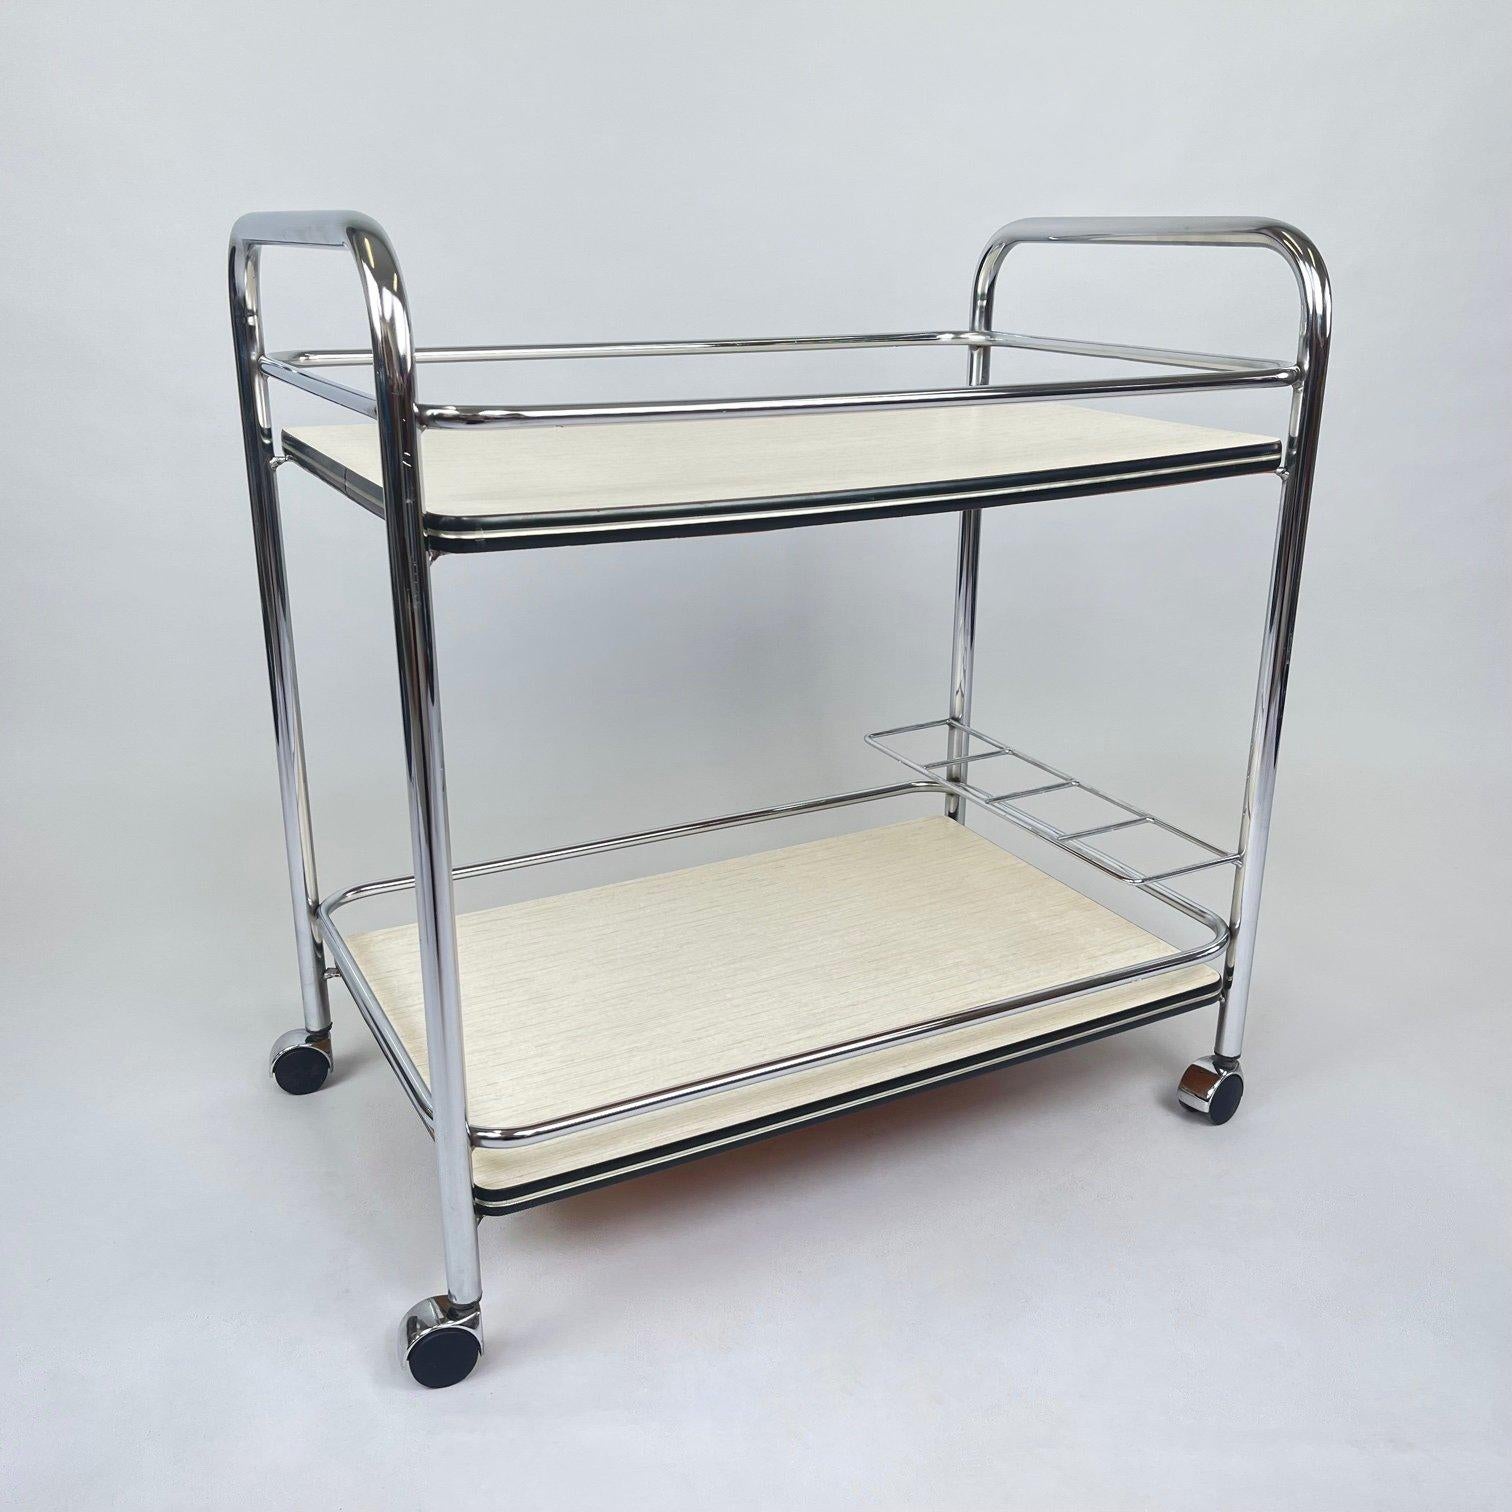 Czech Vintage Chrome and Plywood Serving Cart, 1980's